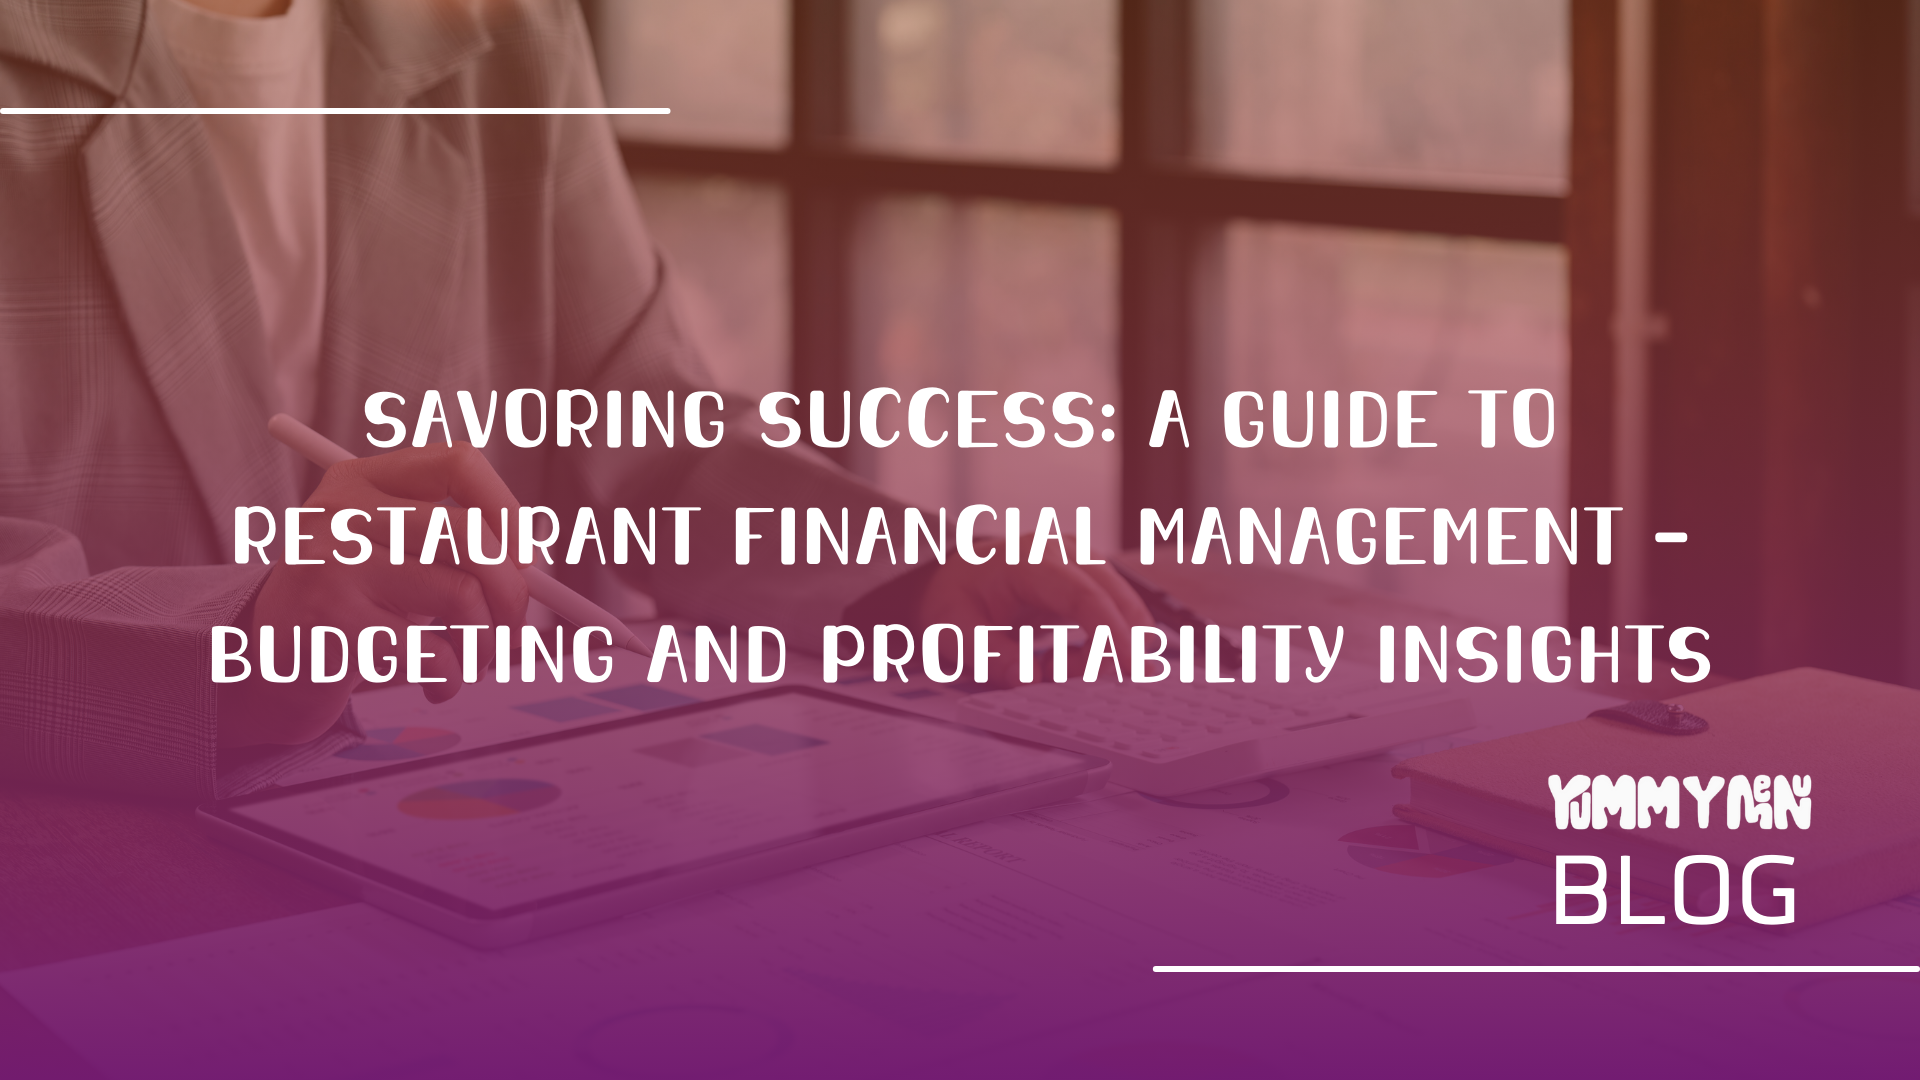 Savoring Success: A Guide to Restaurant Financial Management - Budgeting and Profitability Insights